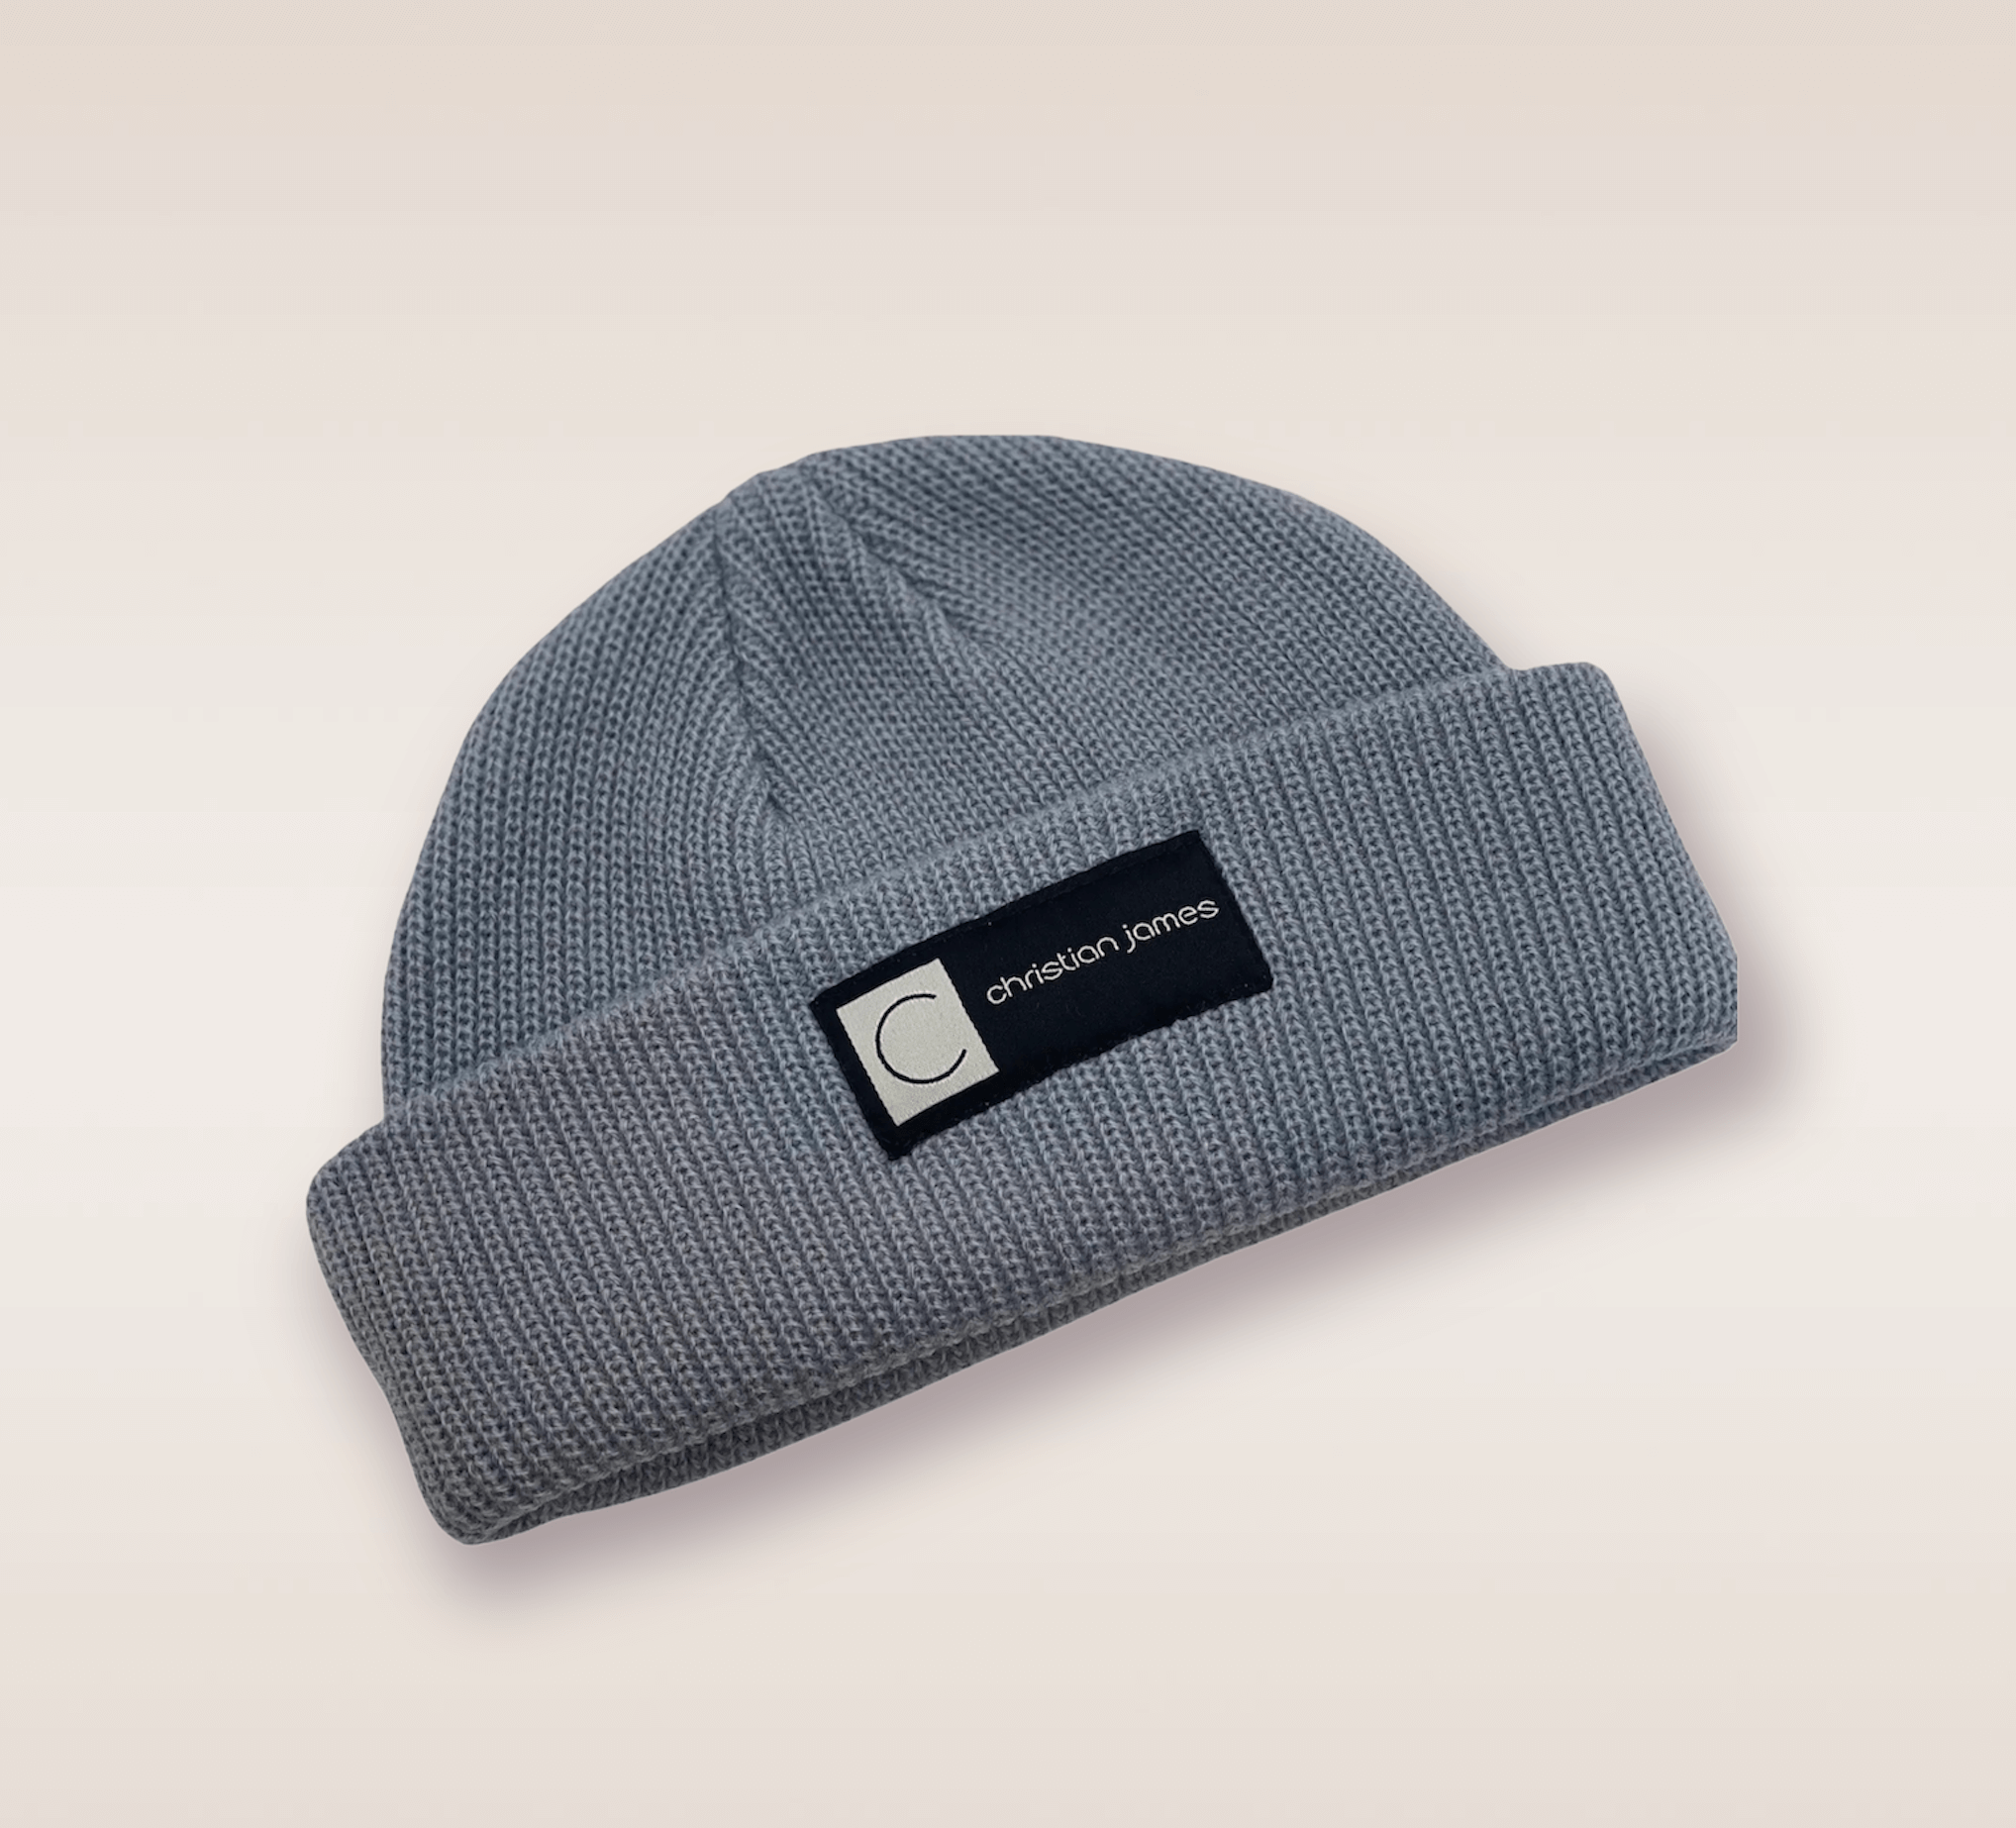 In this up-close shot, we are introduced to the Gray CJ beanie. A gray knit hat featuring an embroidered patch of the brand's acronym in black and white. 